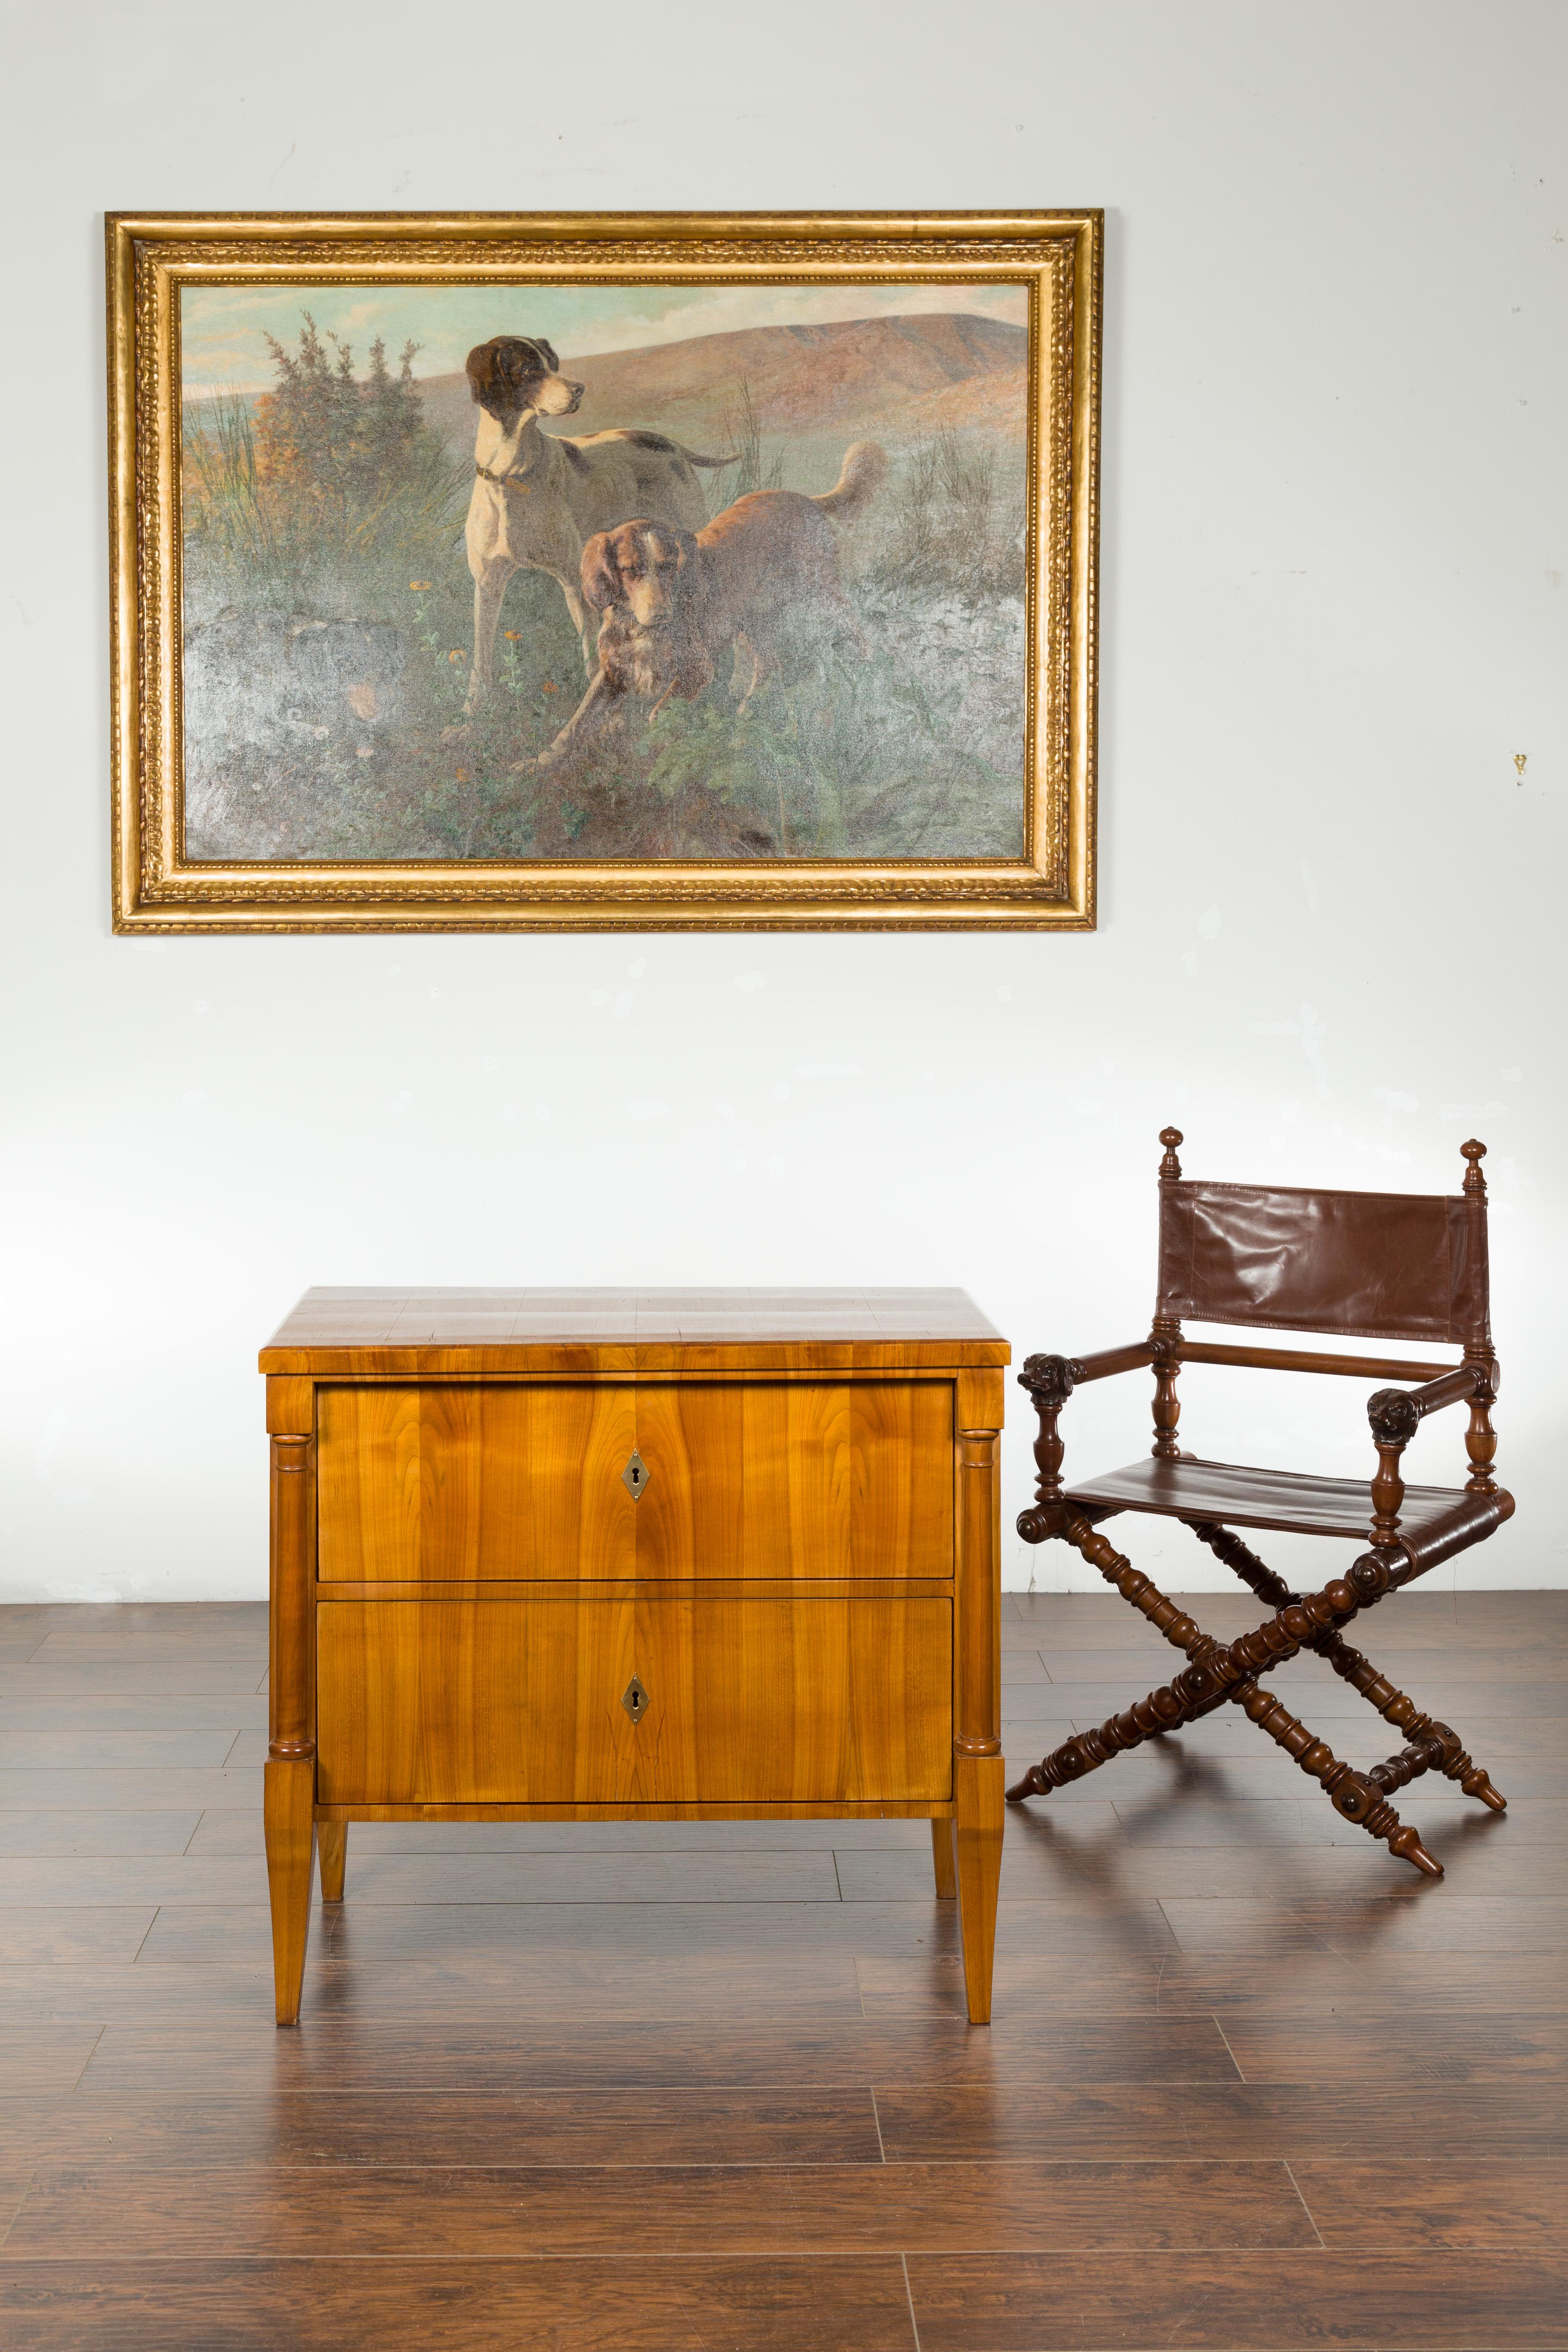 An Austrian Biedermeier period walnut commode from the mid-19th century, with two drawers and semi-columns. Created in Austria during the Biedermeier period, this walnut veneered commode features a rectangular top sitting above two drawers, fitted